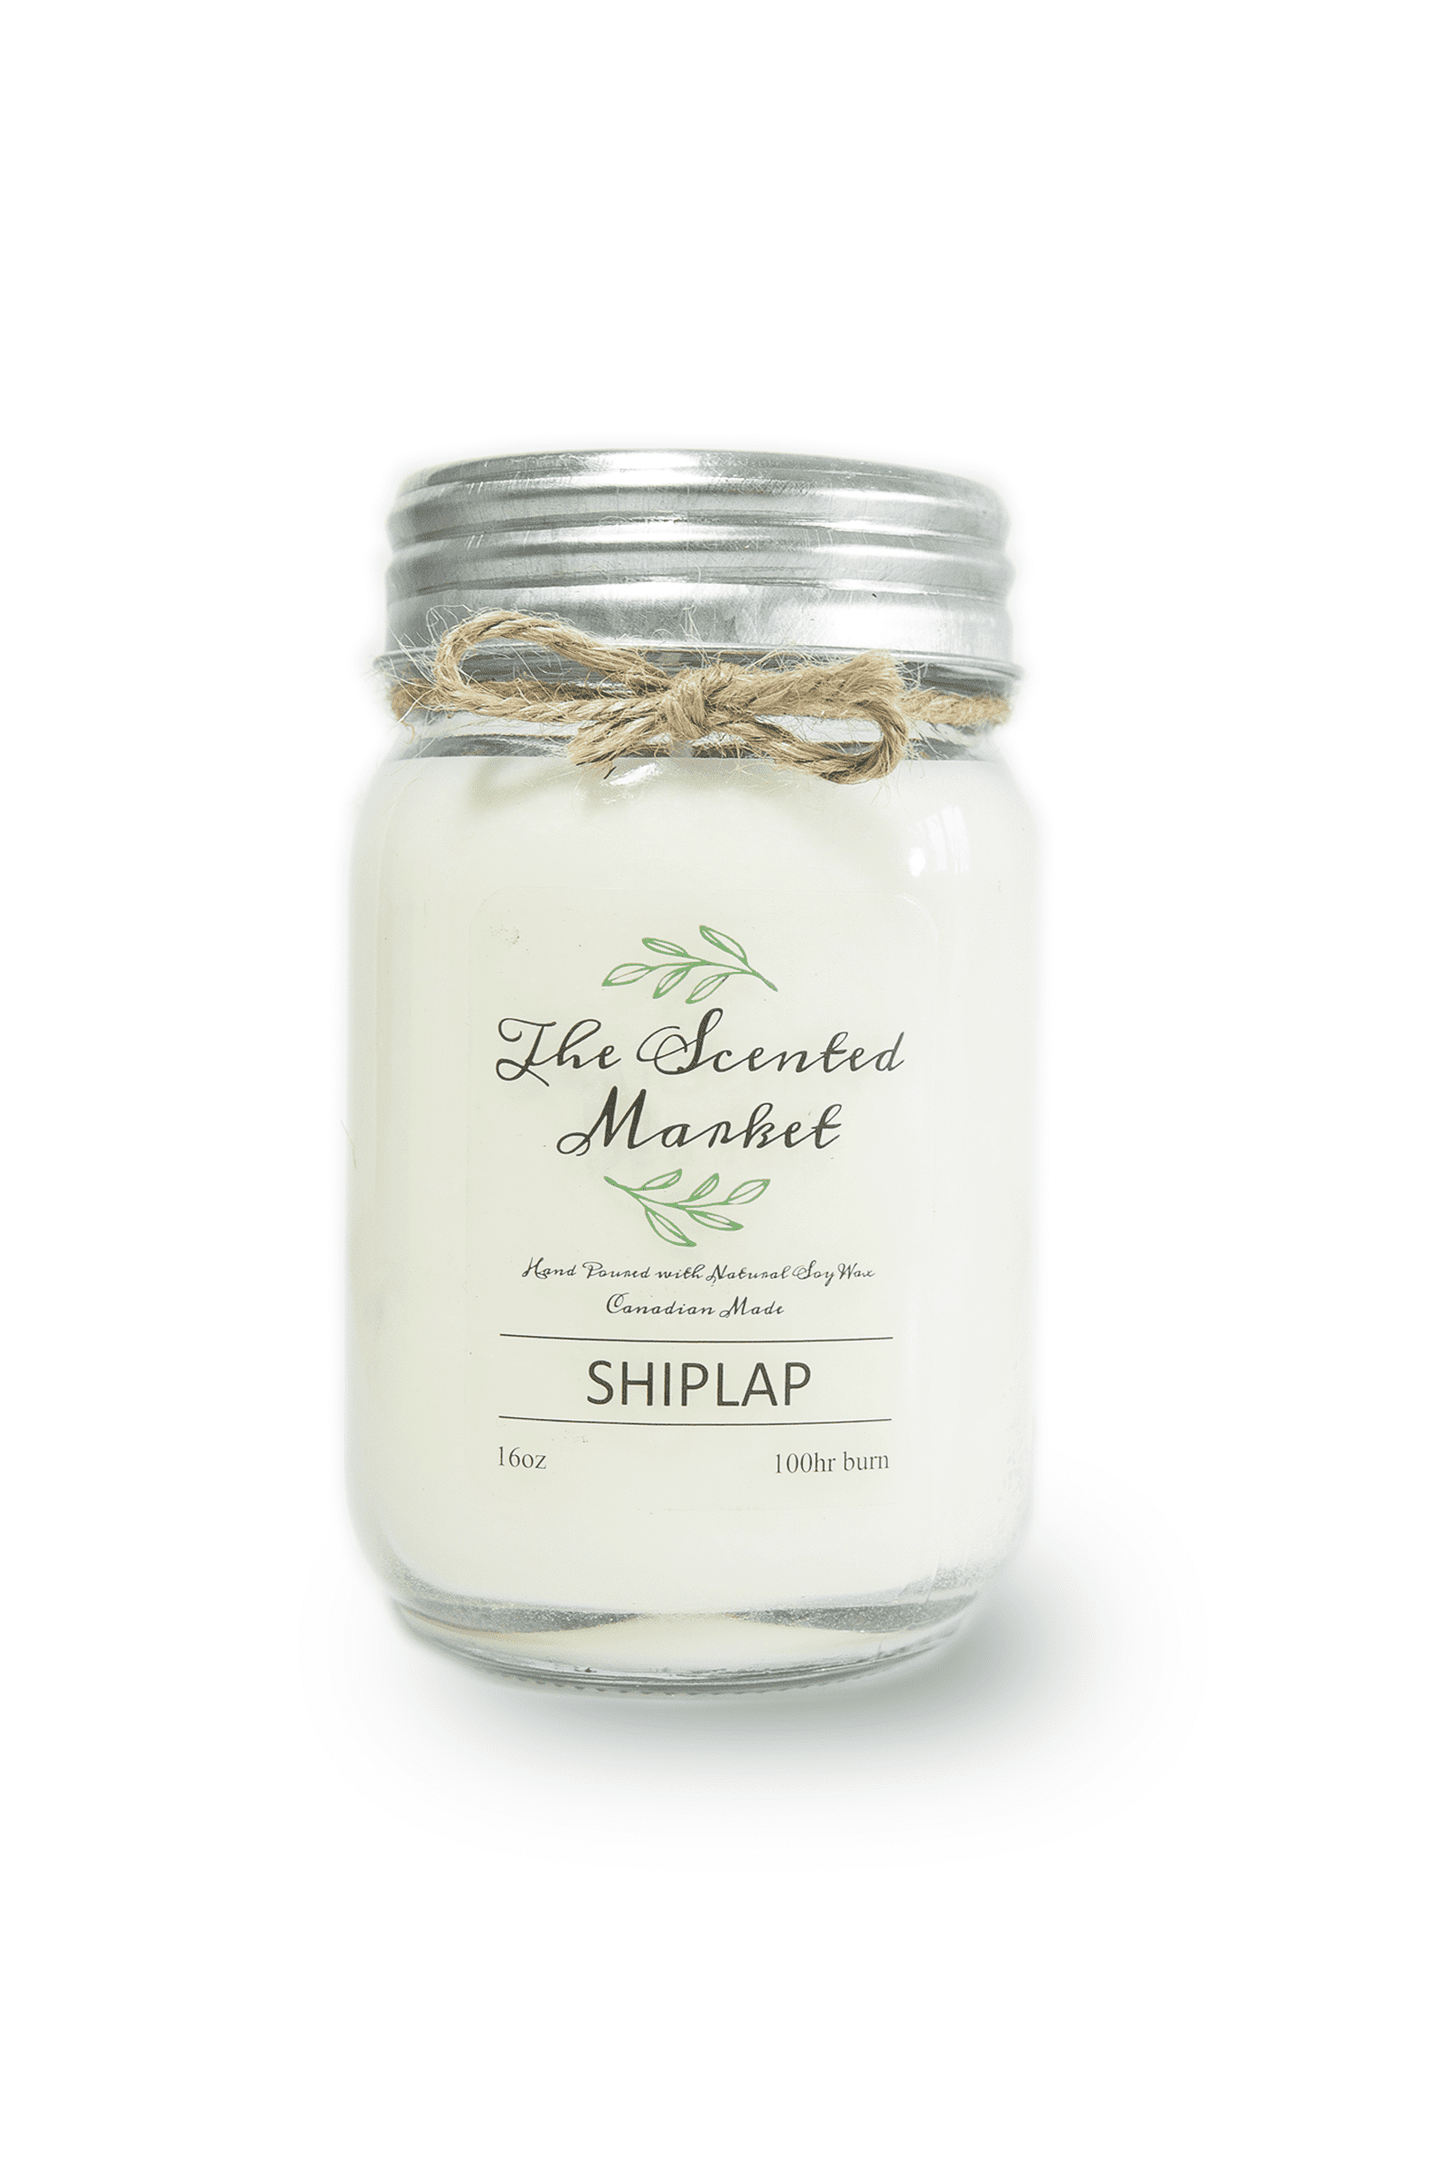 Signature Shiplap Scented Soy Wax Mason Jar Candle in 16oz